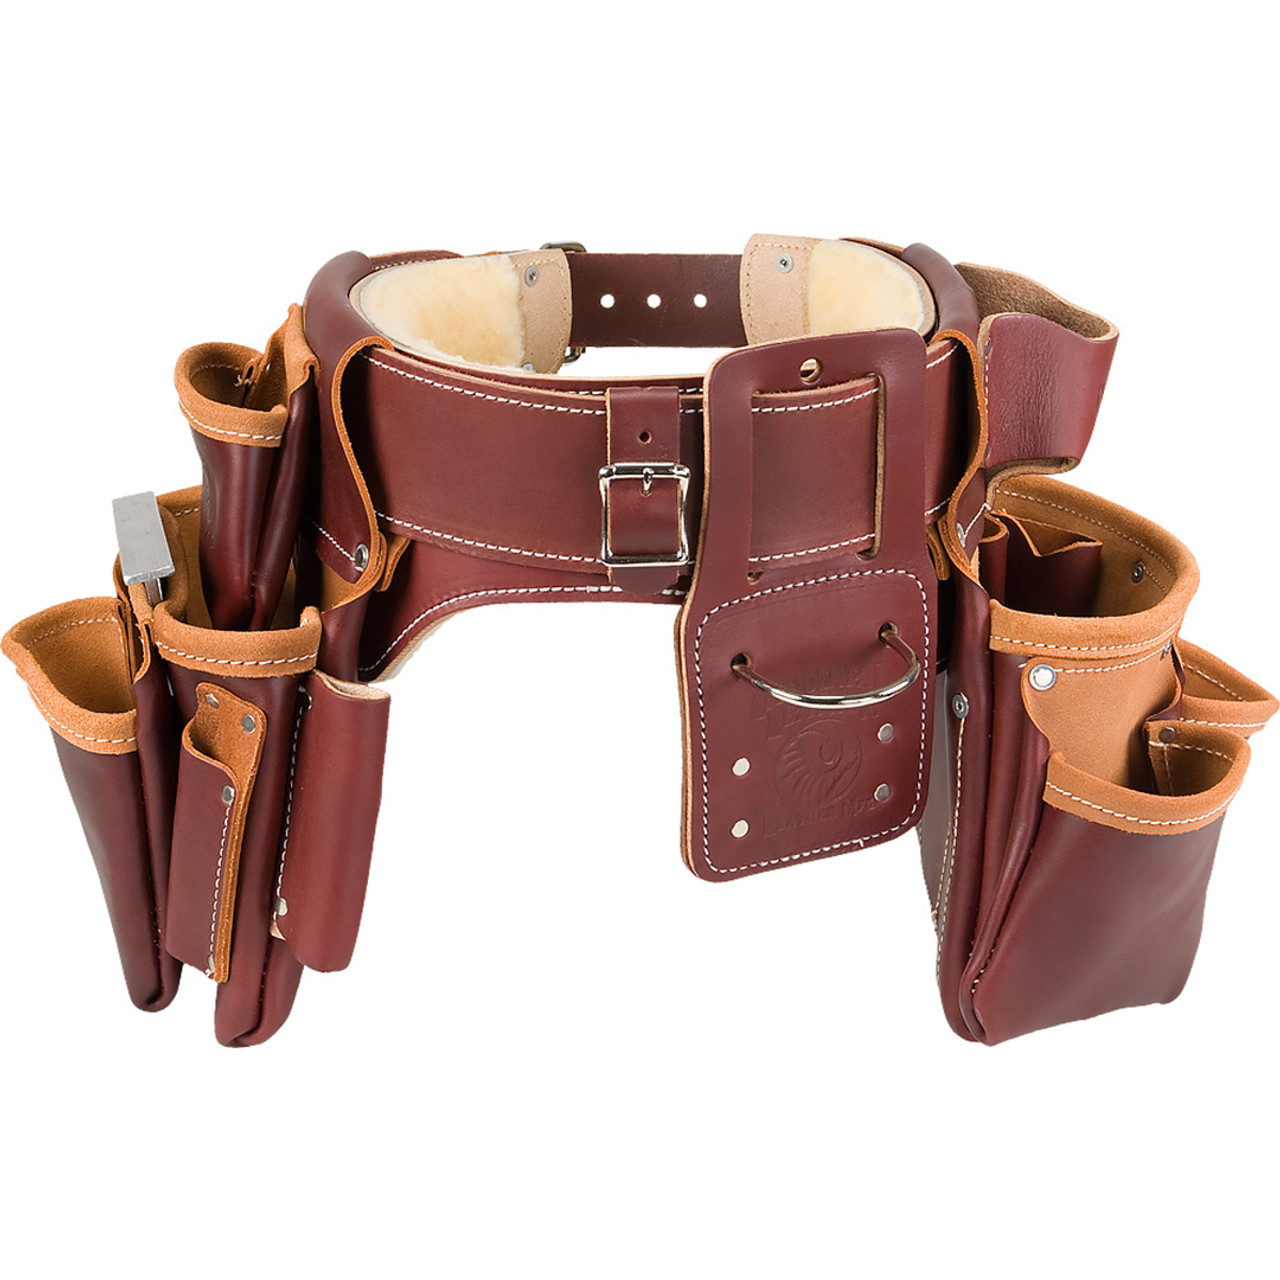 Occidental Leather OCC-5005 Belt Liner with Sheepskin Atlas-Machinery